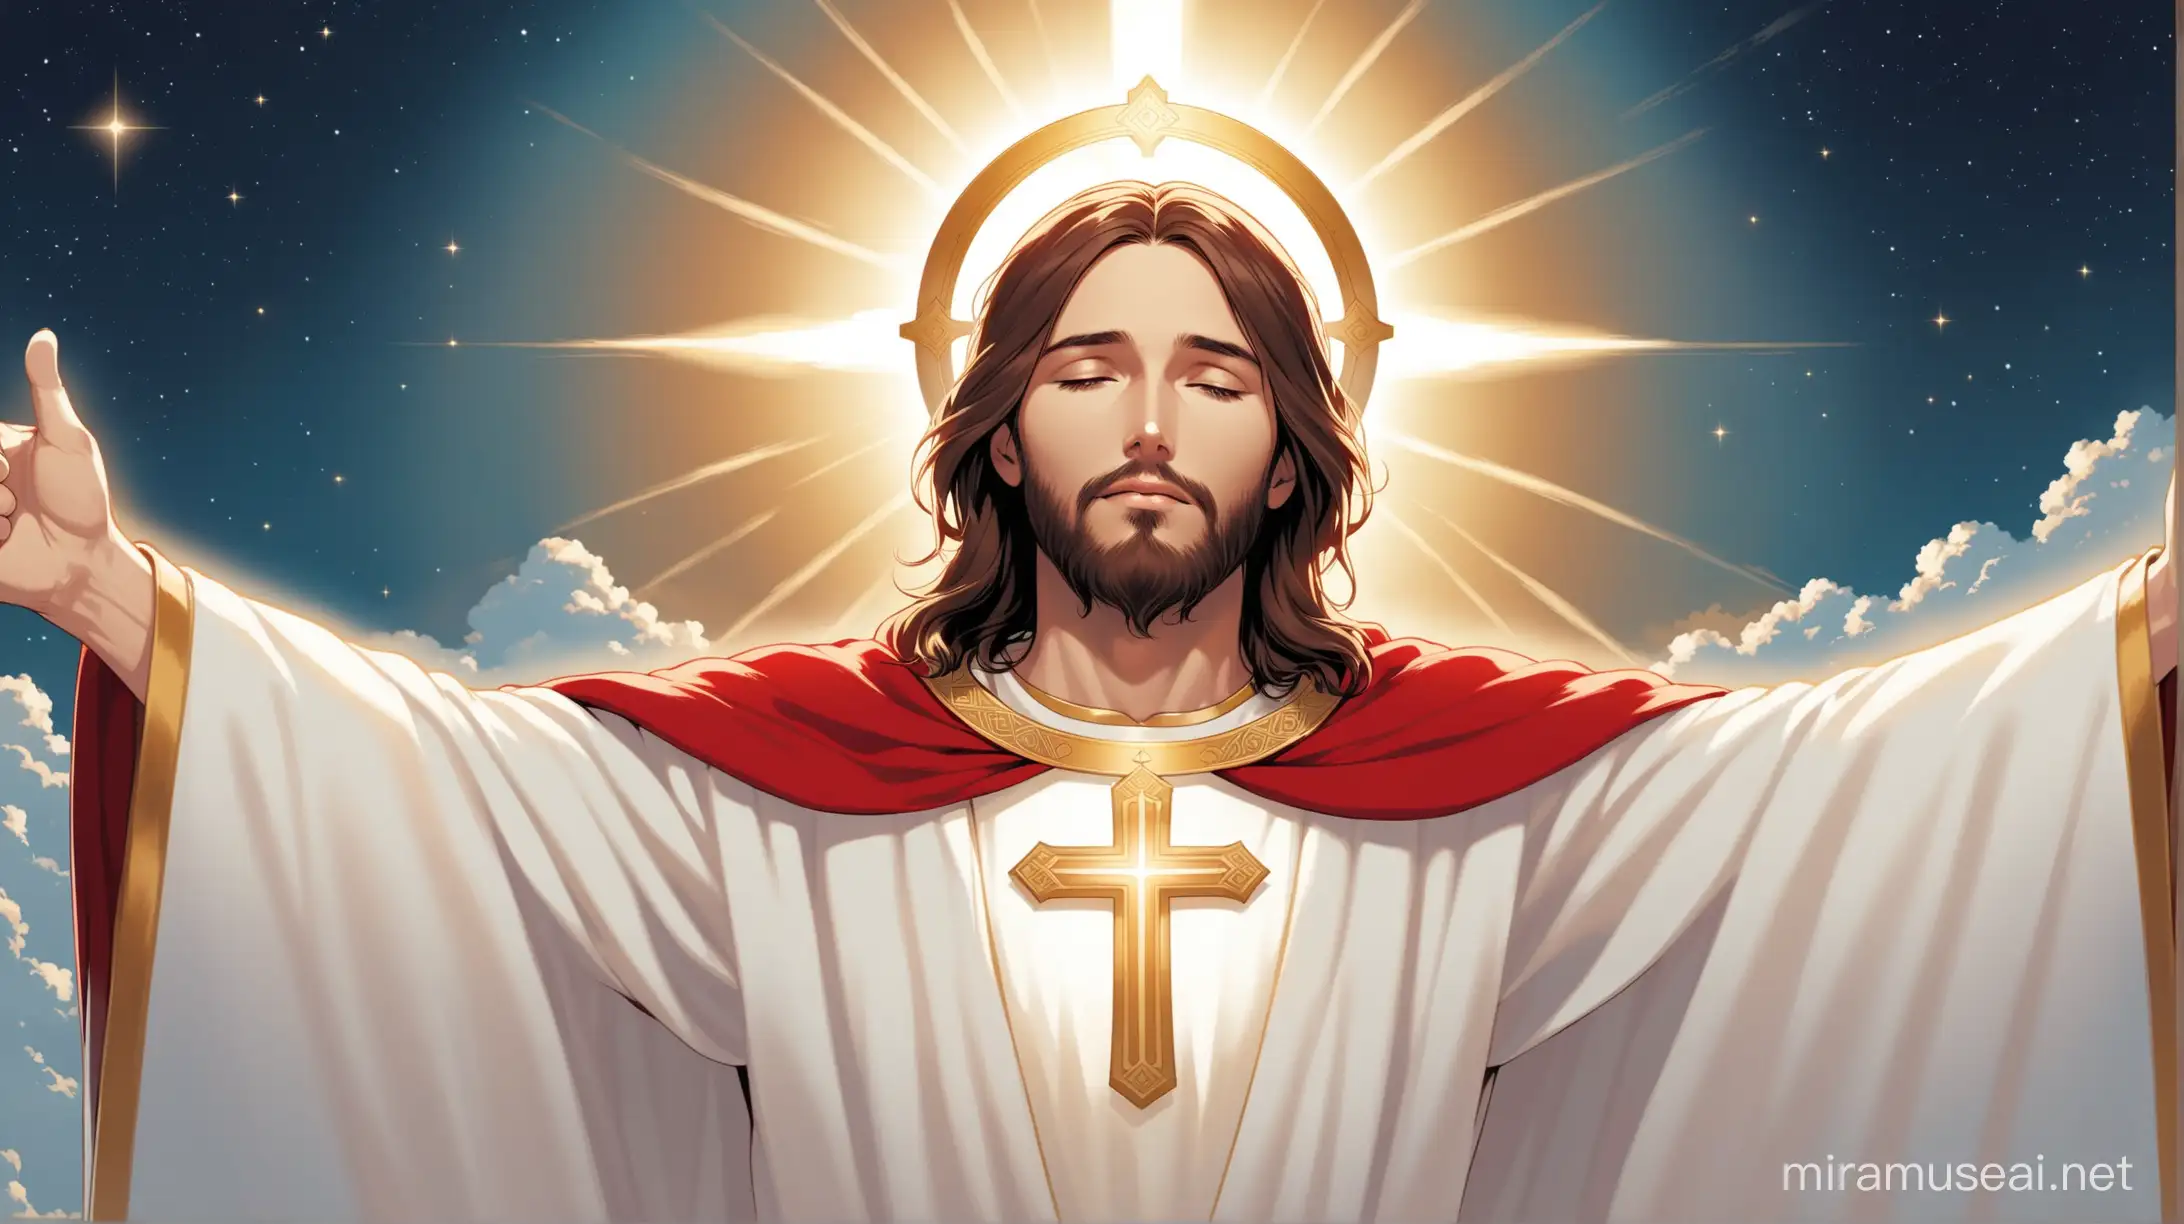 Jesus Christ standing in heaven with a orthodox halo around his head, he wears red cape and white robe, he's peaceful and looks like he wants to hug the camera